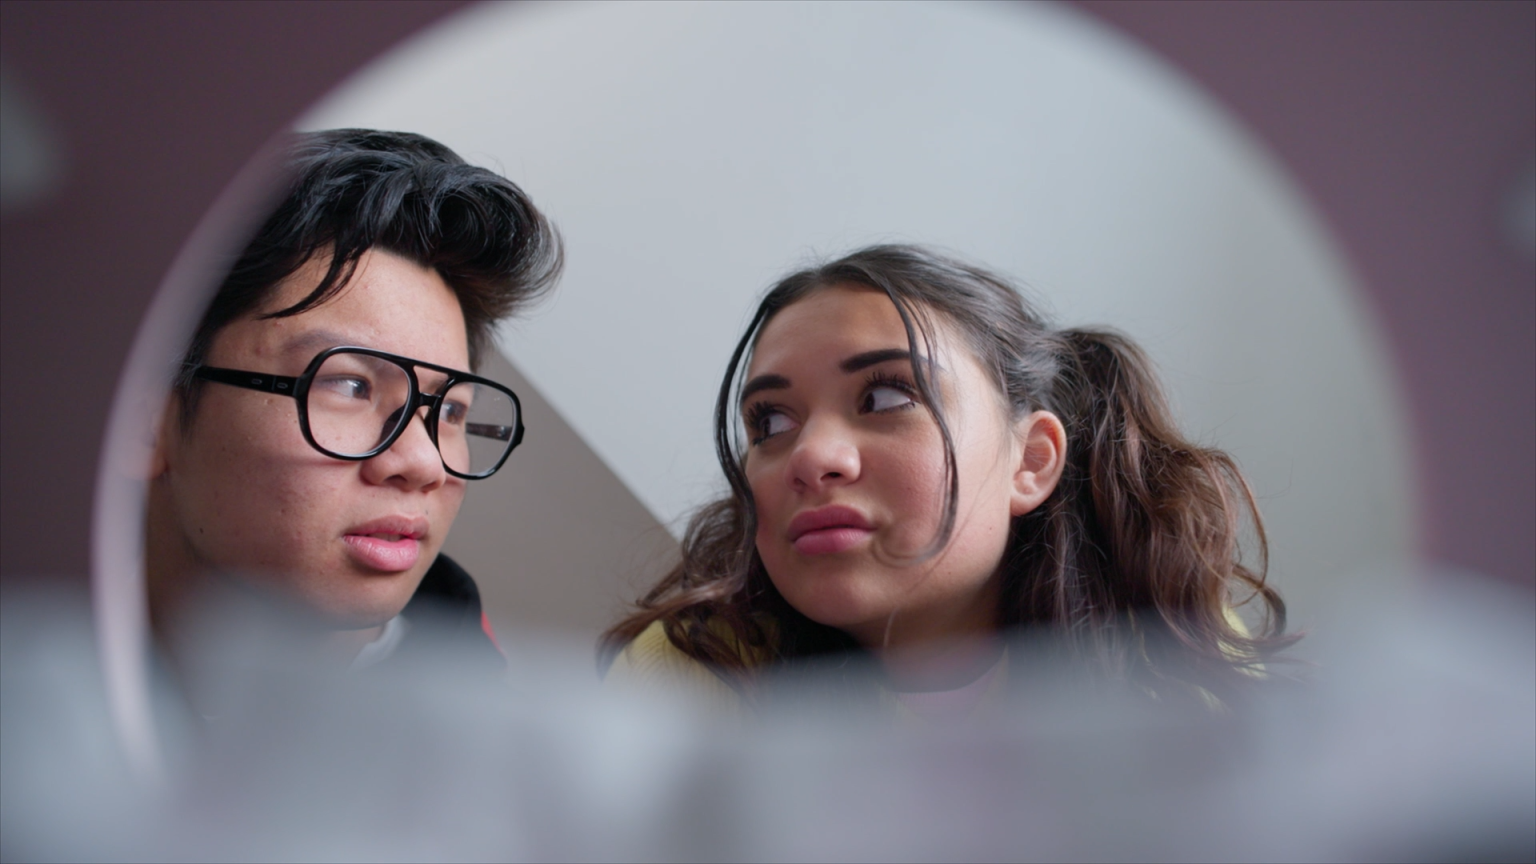 Still from 'Bizarre Date', episode 14 of Broodje Aap. It's a POV from within a toilet bowl. The foreground has some blurry toiletpapier. Hanging above the toiletbowl, looking at each other, are two teenagers (one asian boy with dark hair and thick rimmed sunglasses, and one white girl with brown hair in two pigtails).